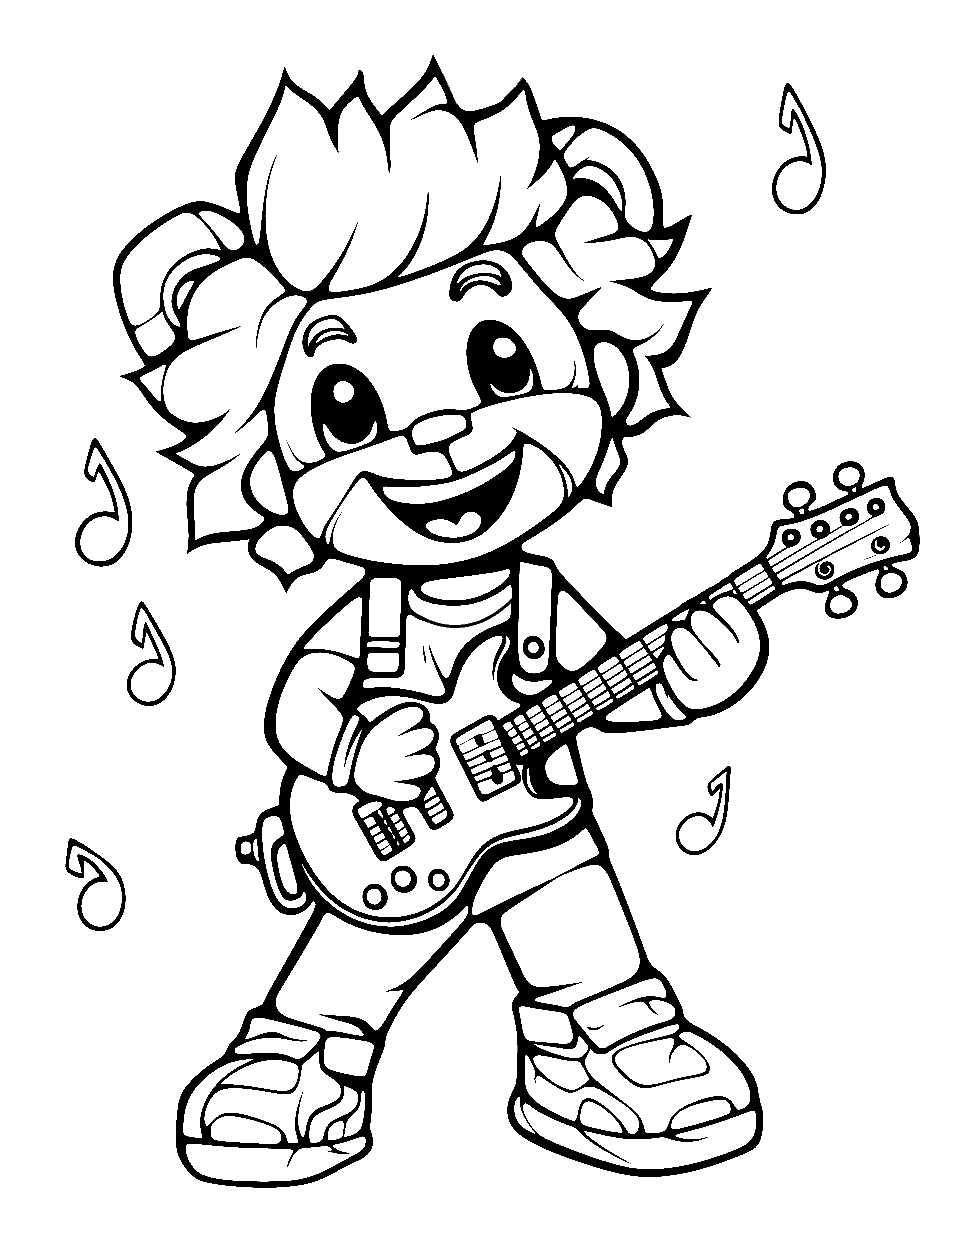 Glamrock Performance Five Nights at Freddys Coloring Page - A Glamrock animatronic performing enthusiastically on stage.